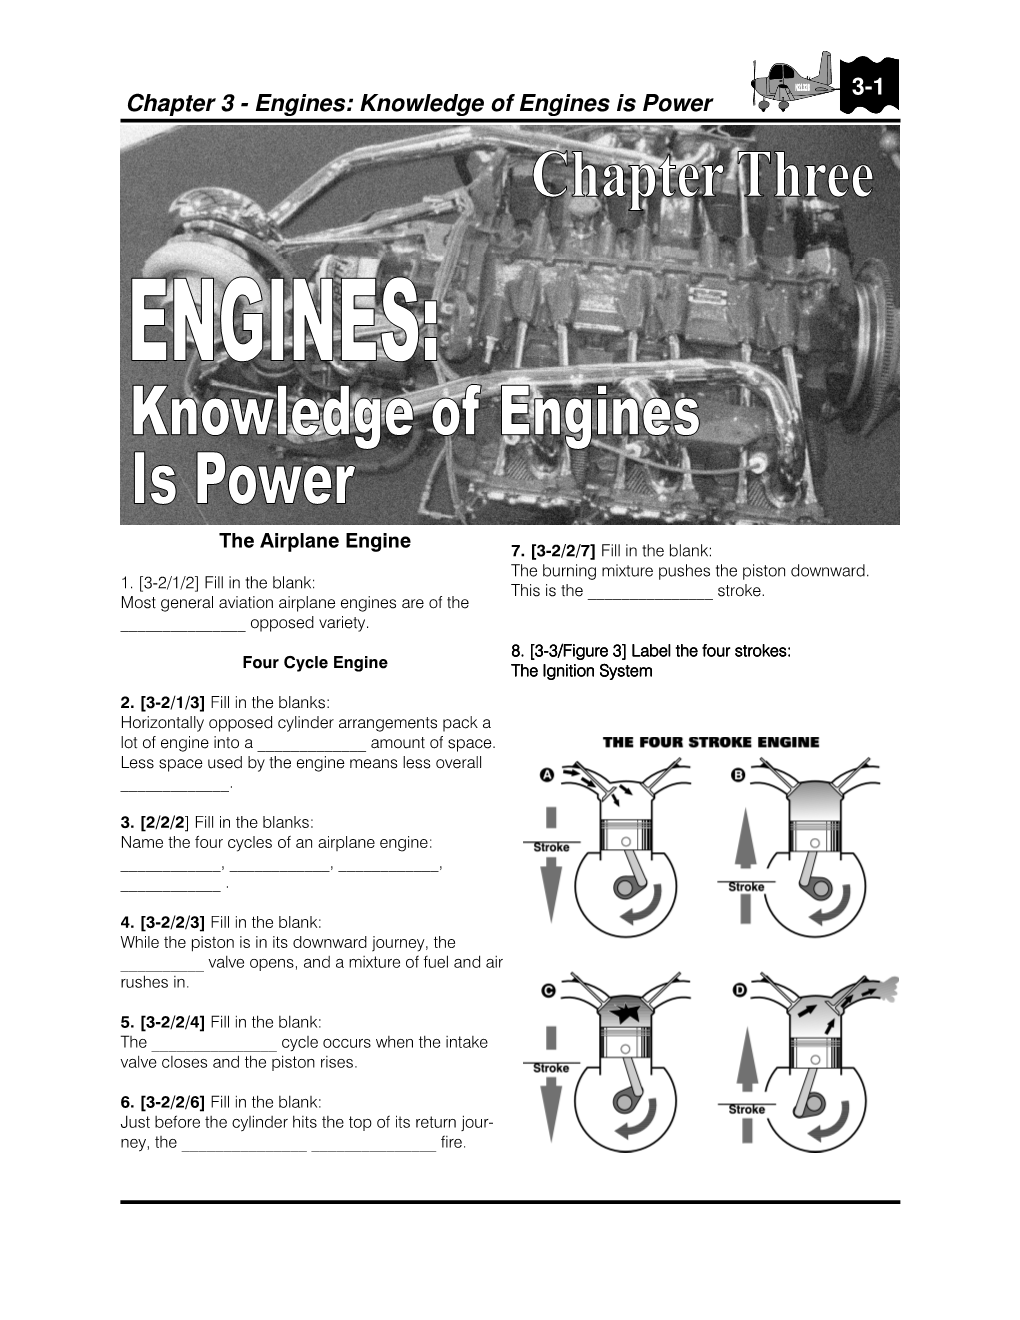 Chapter 3 - Engines: Knowledge of Engines Is Power